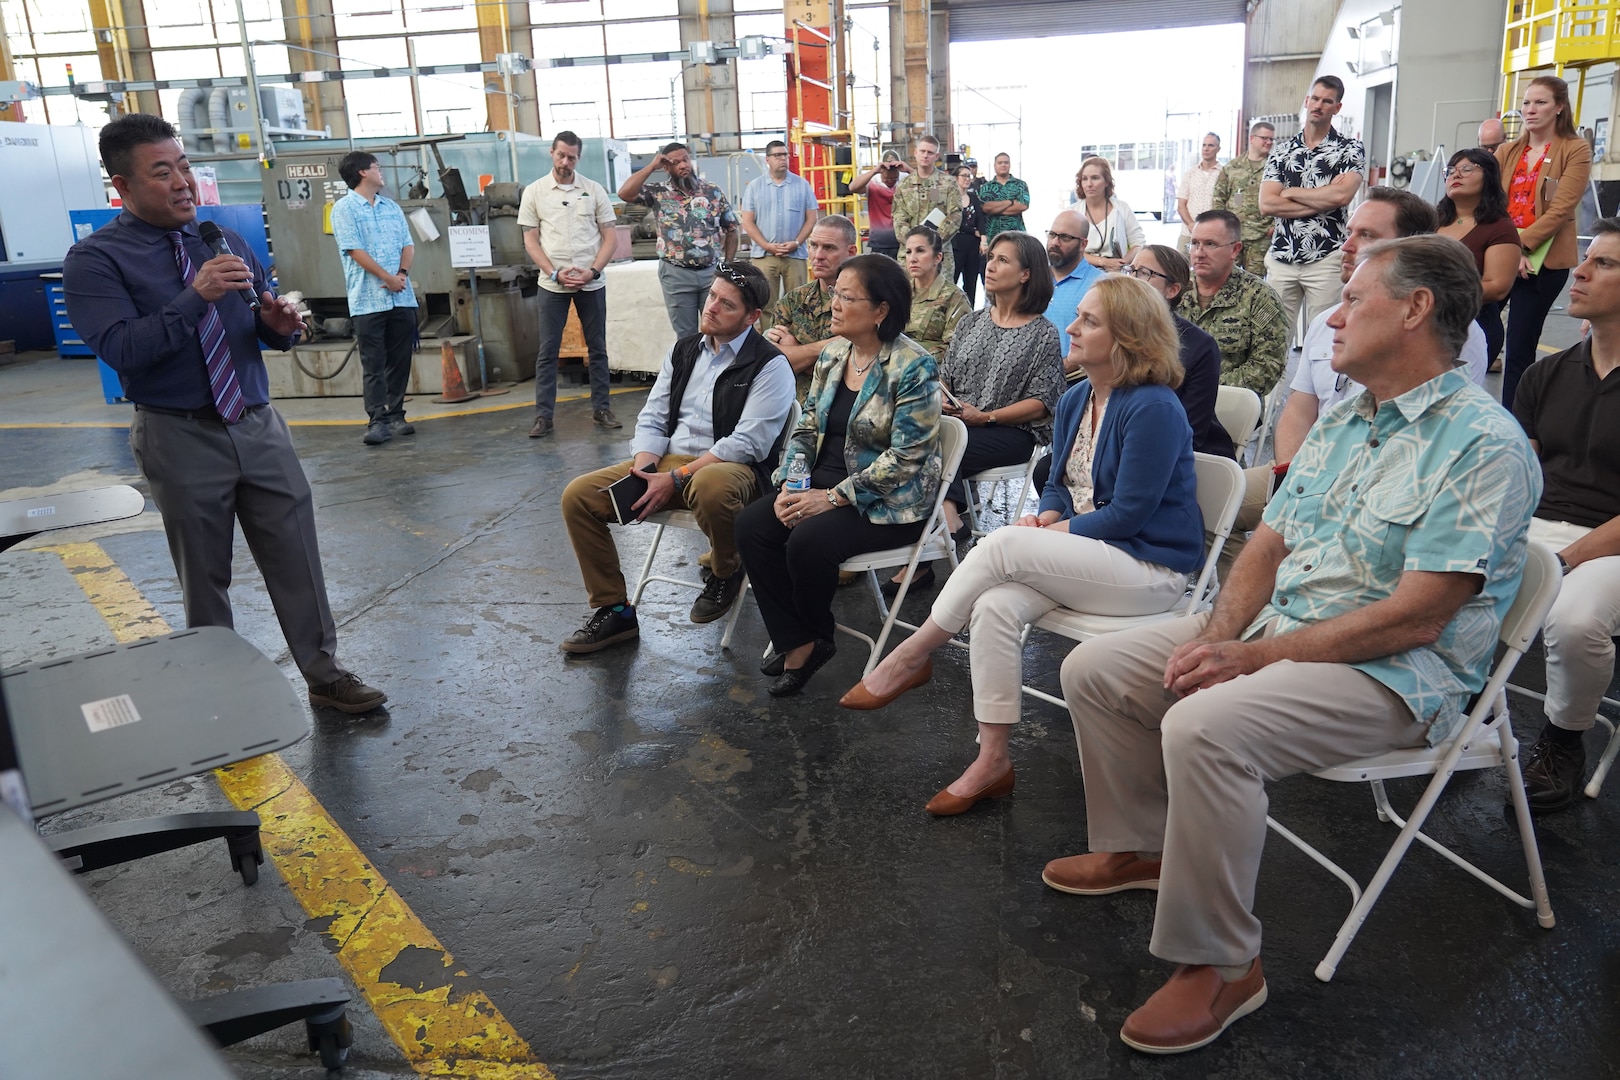 Deputy Secretary of Defense Kathleen Hicks, second from right, Assistant Secretary of Defense for Energy, Installations, and Environment, Brendan Owens, center, Sen. Mazie Hirono, right of center, and Rep. Ed Case, right, receive a briefing from Chad Nakamoto, Production Facilities and Plant Equipment Manager, left, during a tour of Pearl Harbor Naval Shipyard.